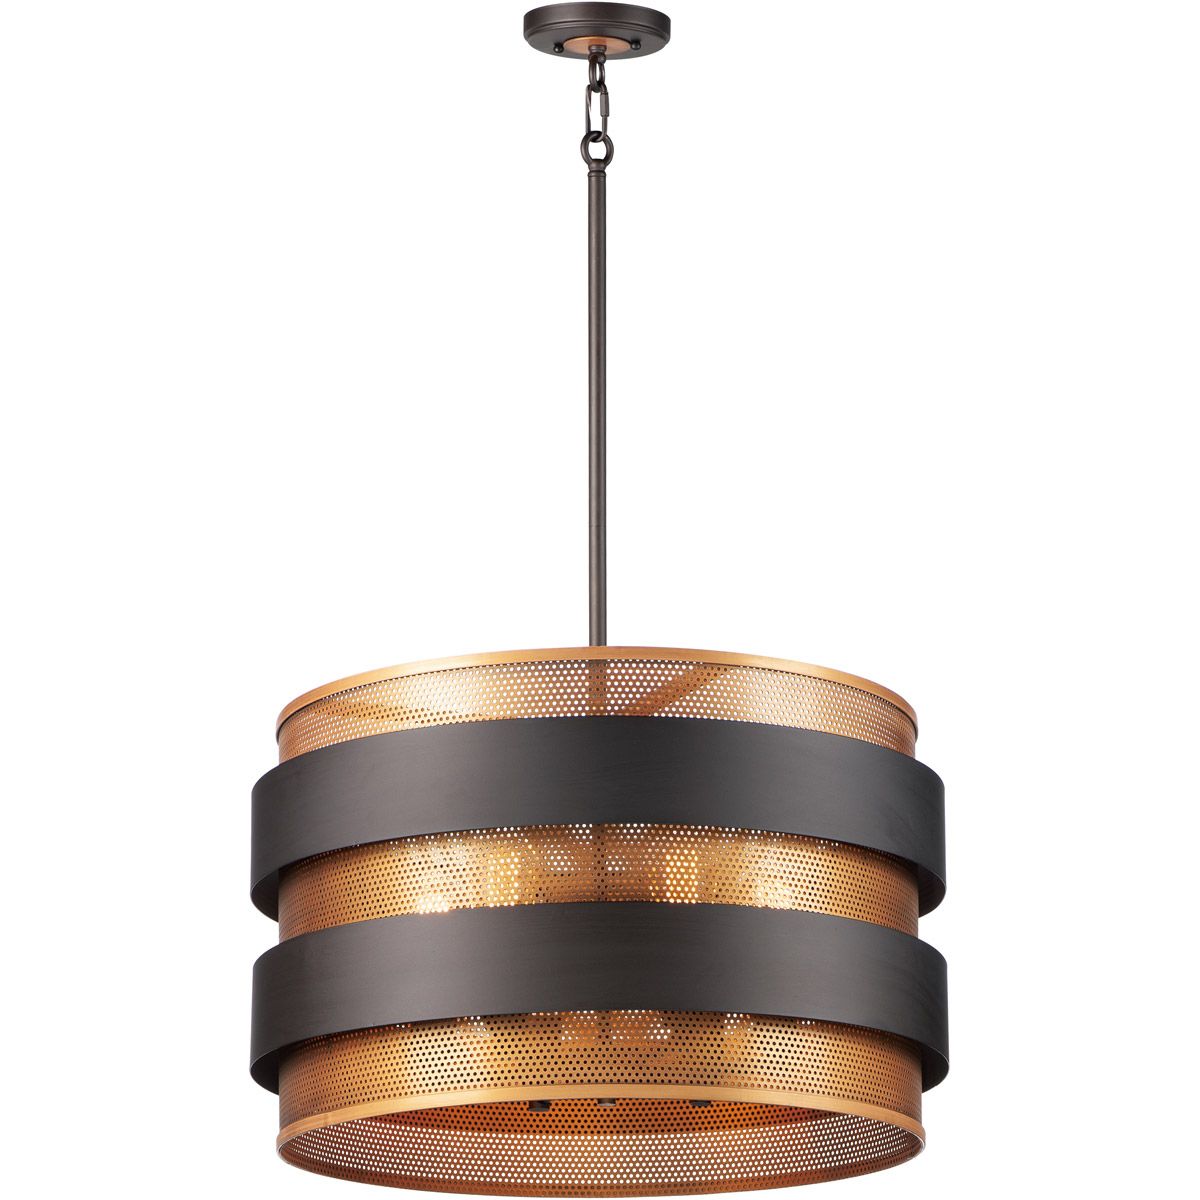 Maxim Lighting 31205oiab Caspian Pendant Oil Rubbed Bronze With Regard To Oil Rubbed Bronze And Antique Brass Four Light Chandeliers (View 5 of 15)